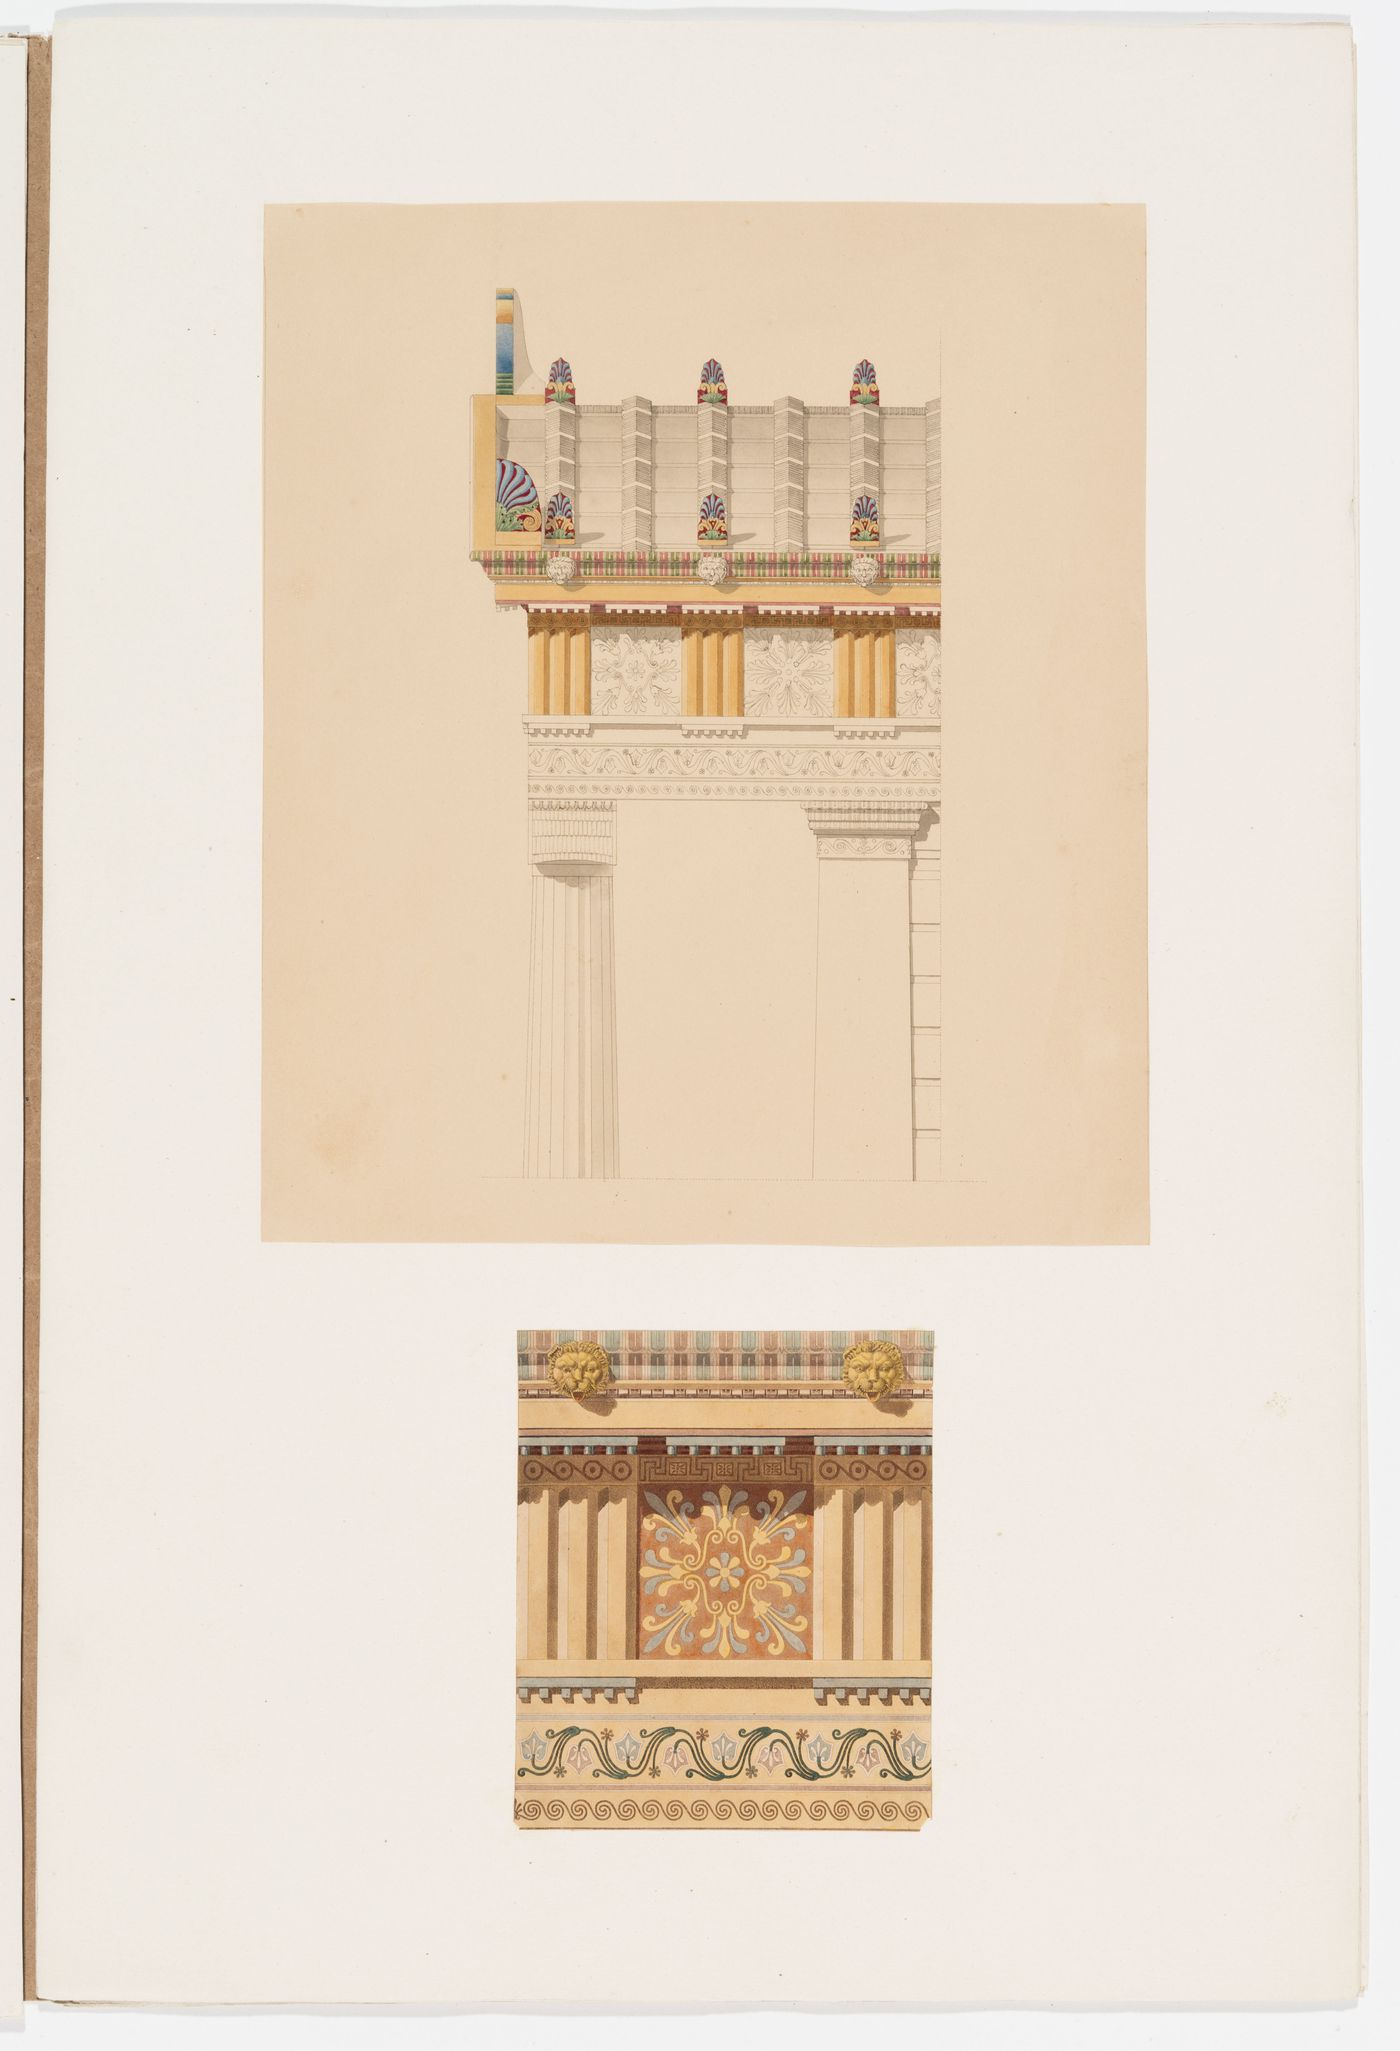 Partial side elevation of a temple and a detail of the entabulature, both with polychrome ornament